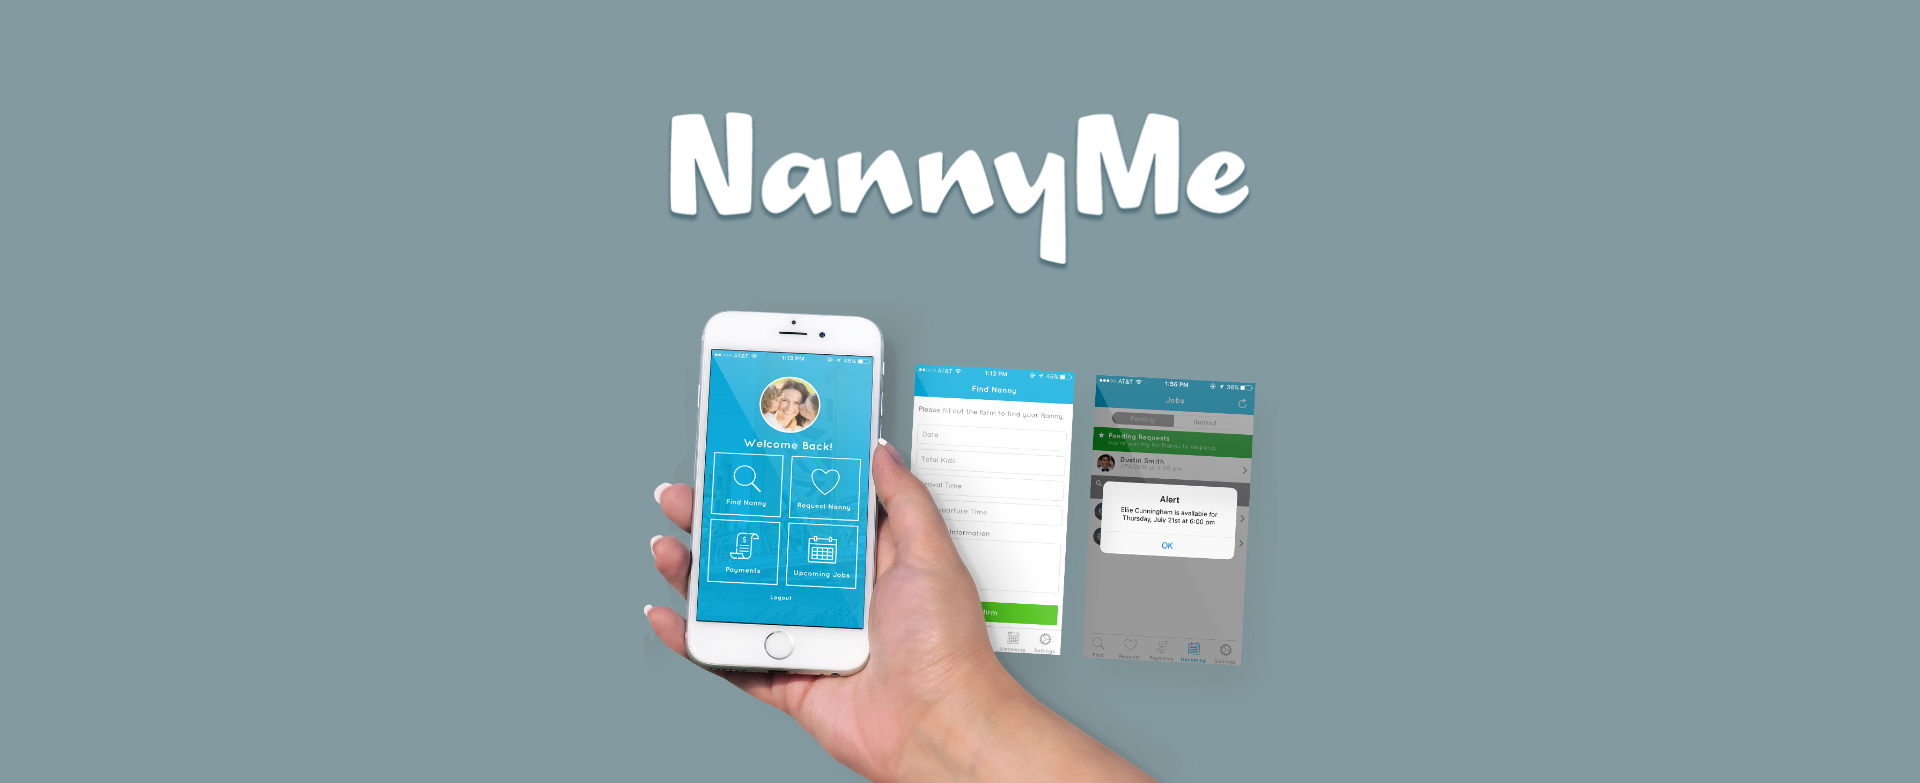 Nanny Me App render with background